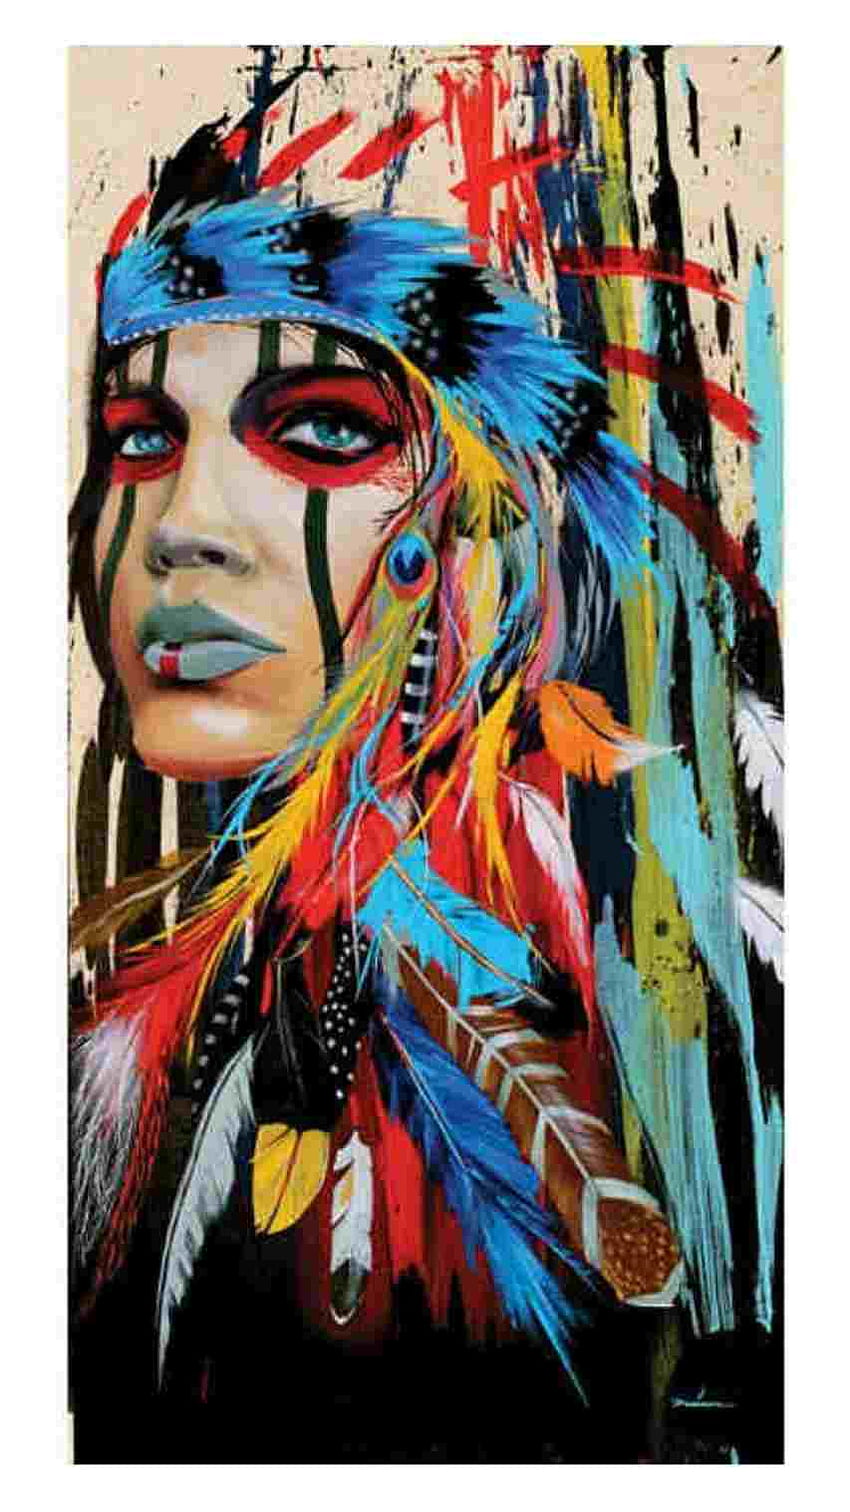 Shield of Her Husband (Lakota Sioux Woman) - Contemporary Western American  Indian Art Painting - Framed Prints by Herald | Buy Posters, Frames, Canvas  & Digital Art Prints | Small, Compact, Medium and Large Variants